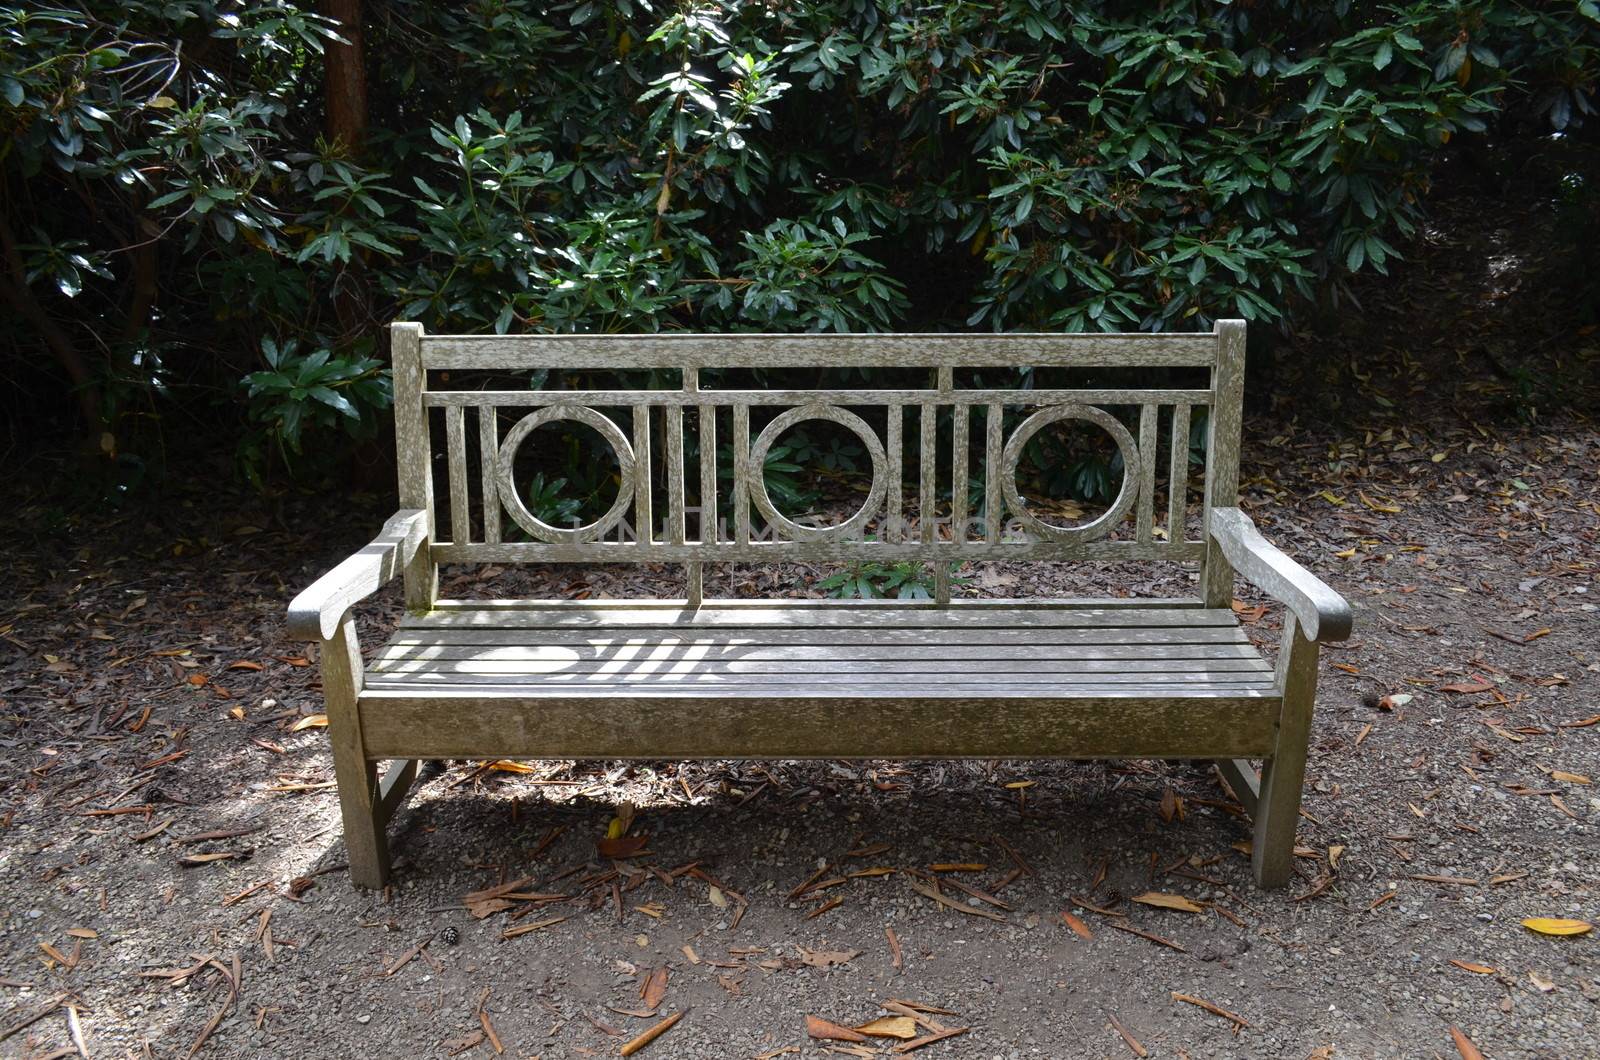 A wooden bench set in a parkland setting.